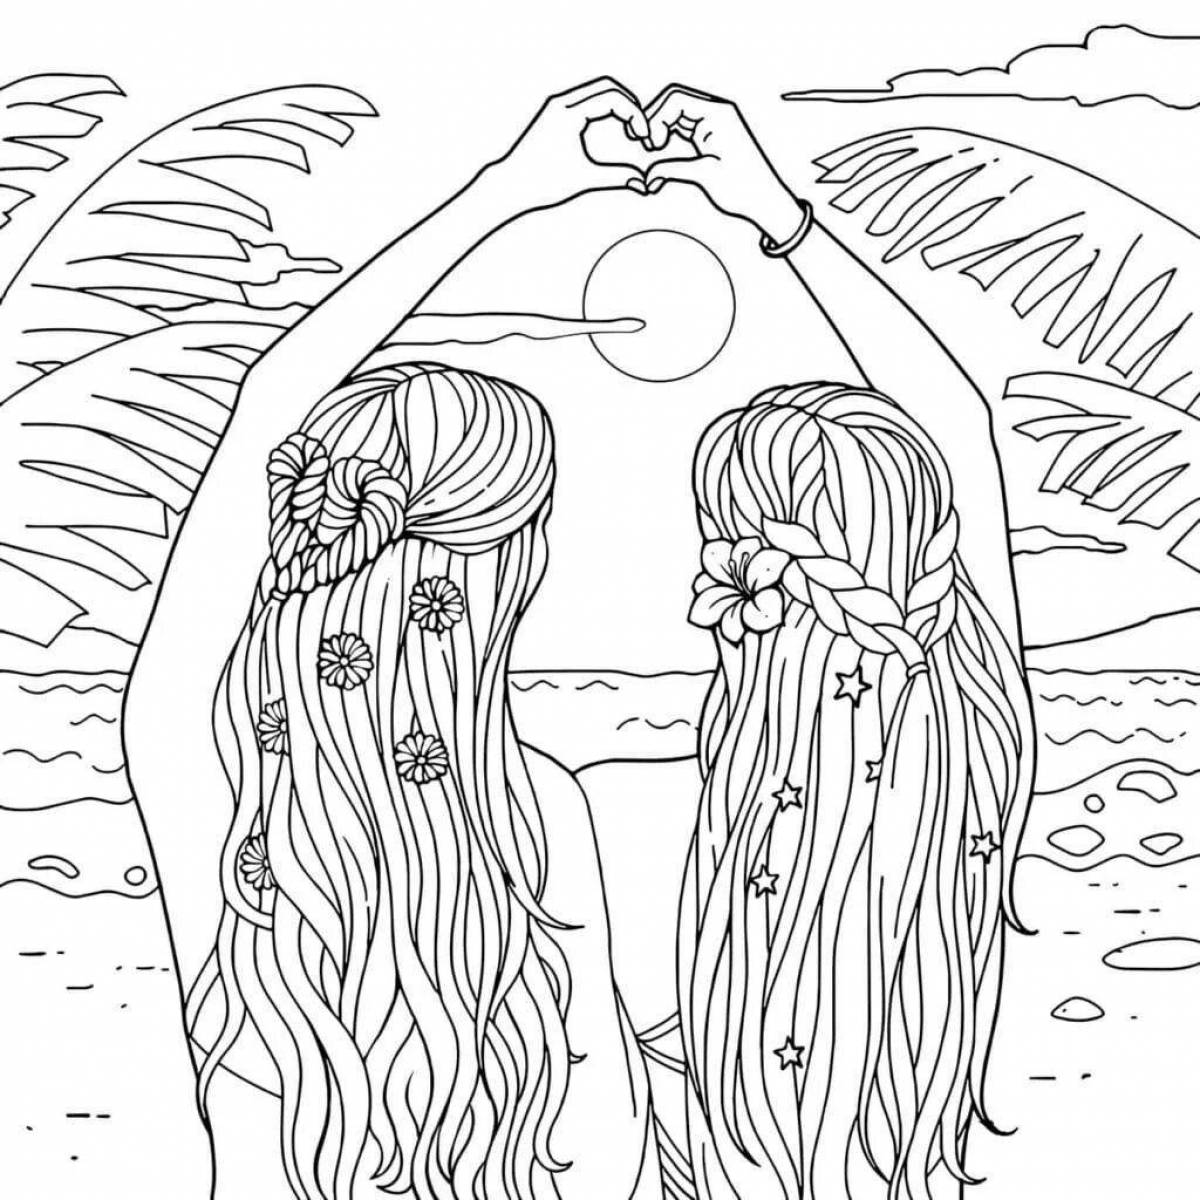 Amazing coloring page 16 for girls